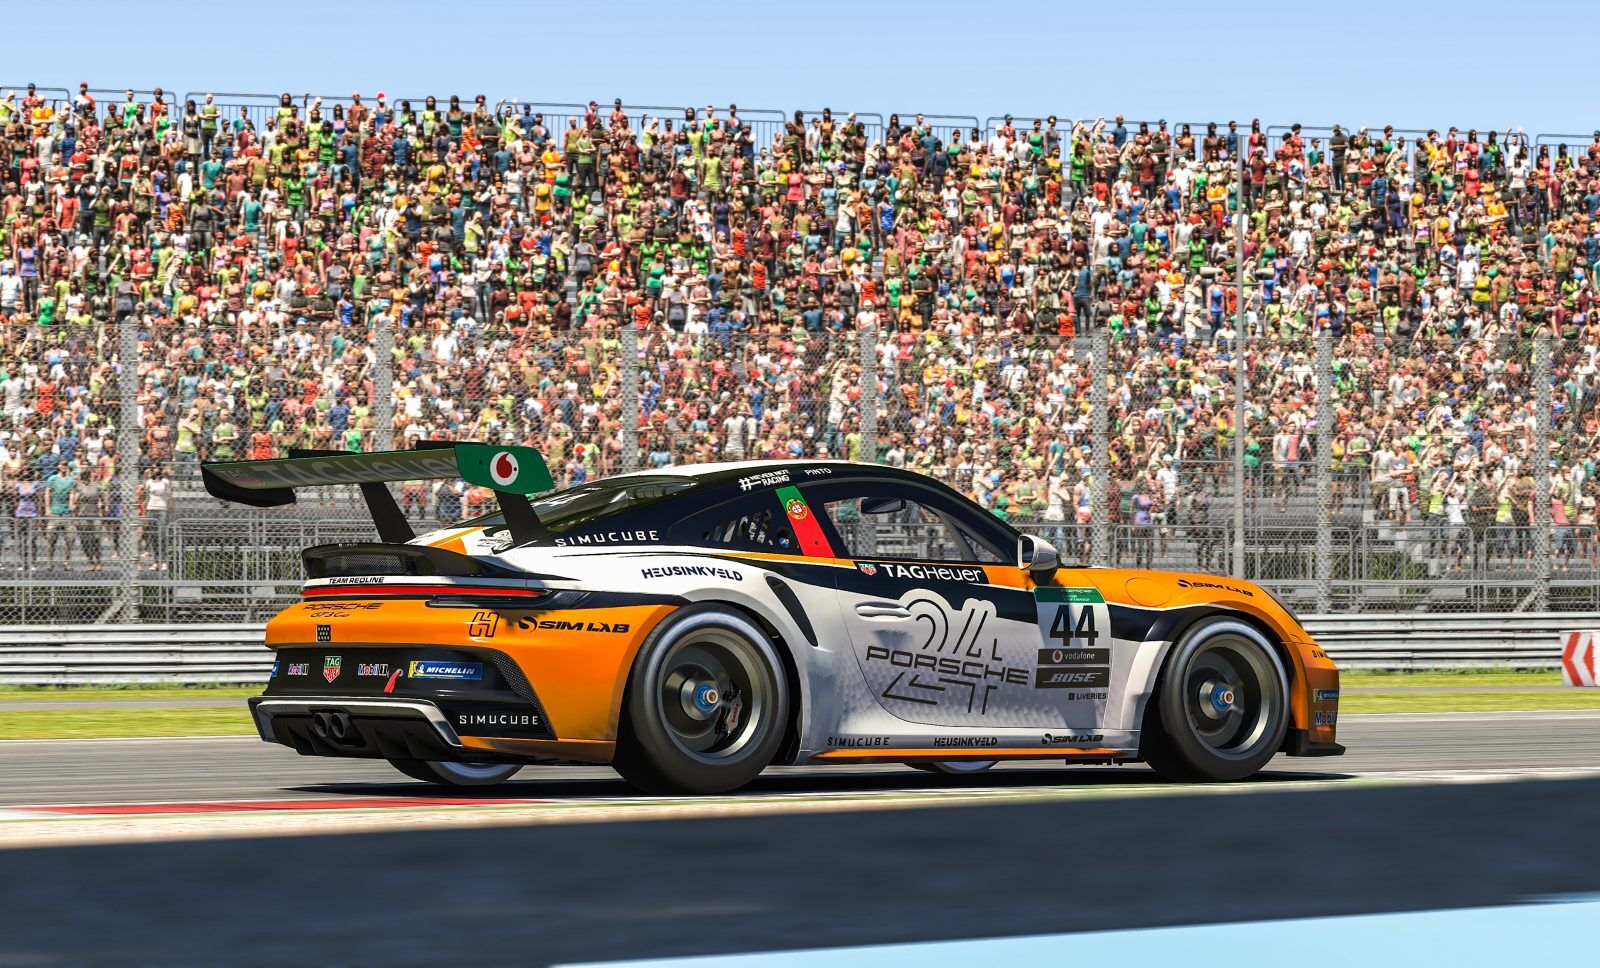 The Porsche TAH Heuer Esports Supercup car of the 2022 series champion Diogo Pinto.